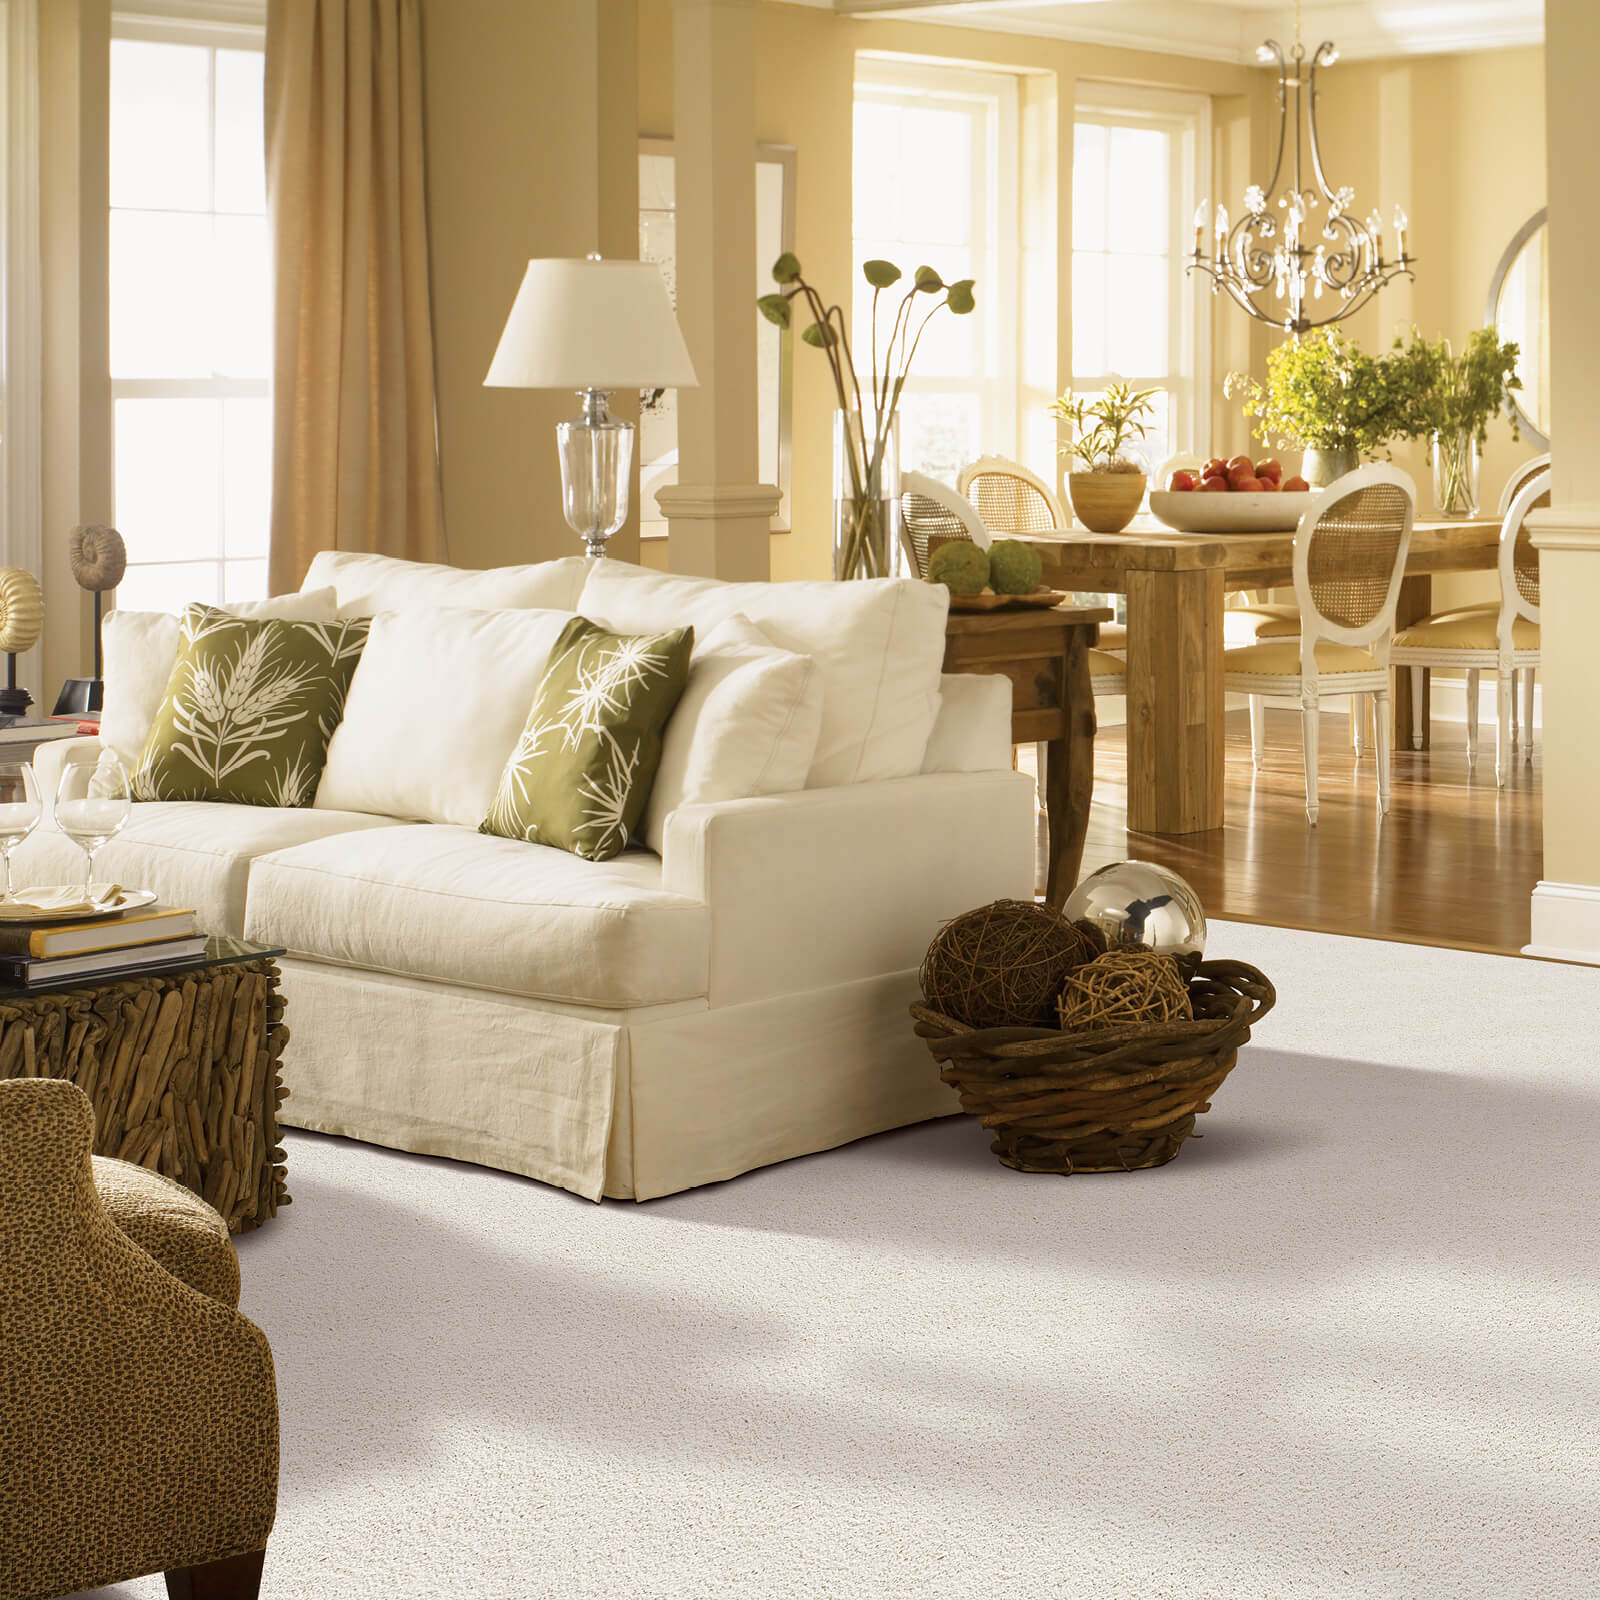 Carpeting in Living Room | Rockwall Floor and Paint